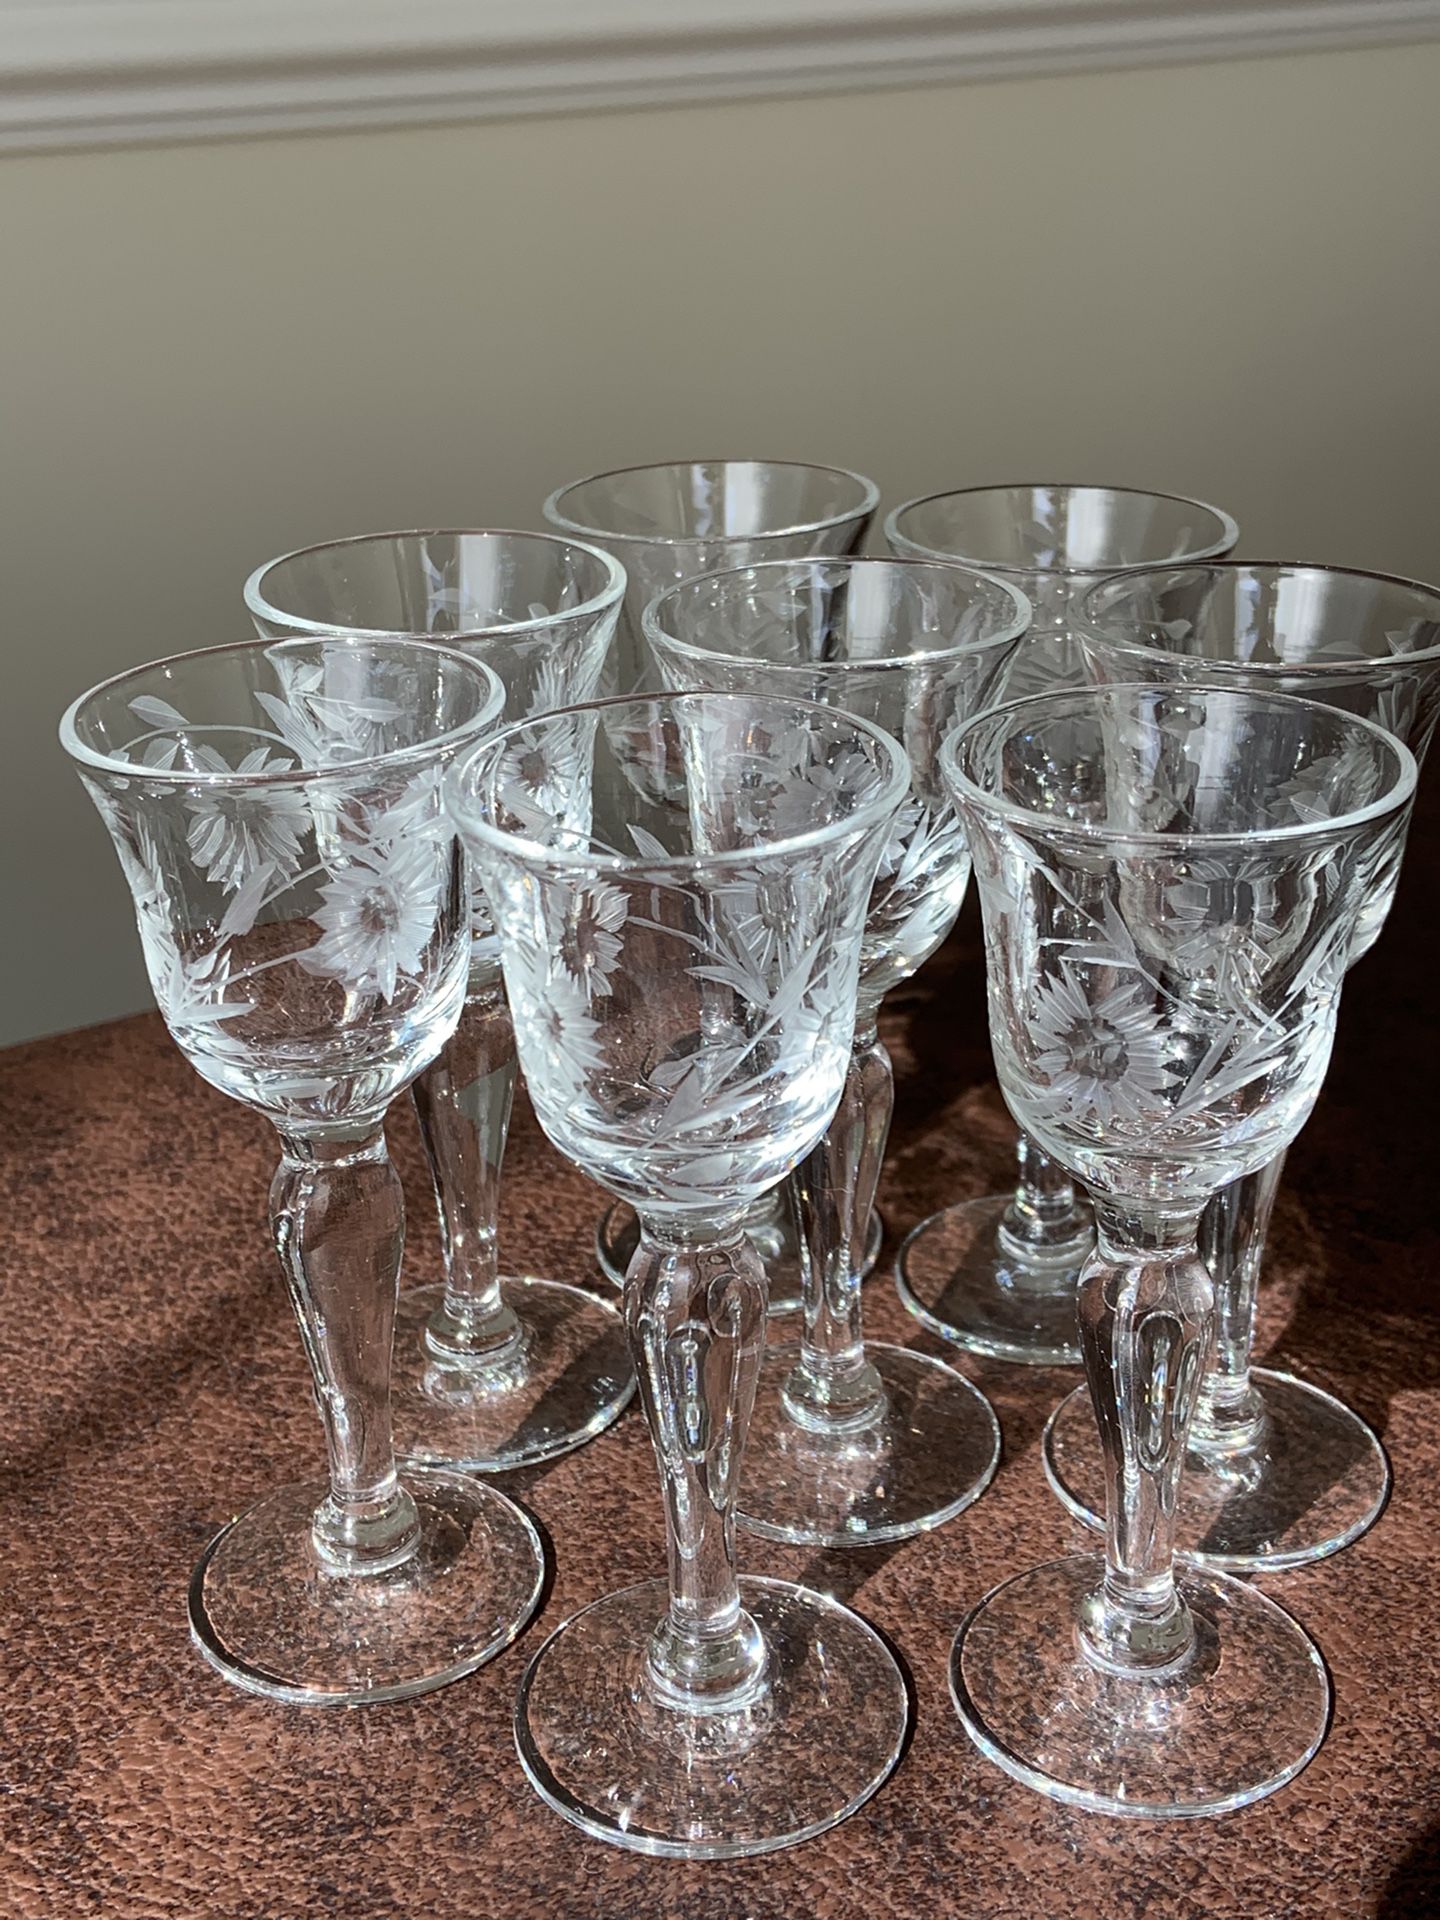 Set of 8 Vintage (Circa 1940’s) Etched Cordial Glasses-Footed Stem